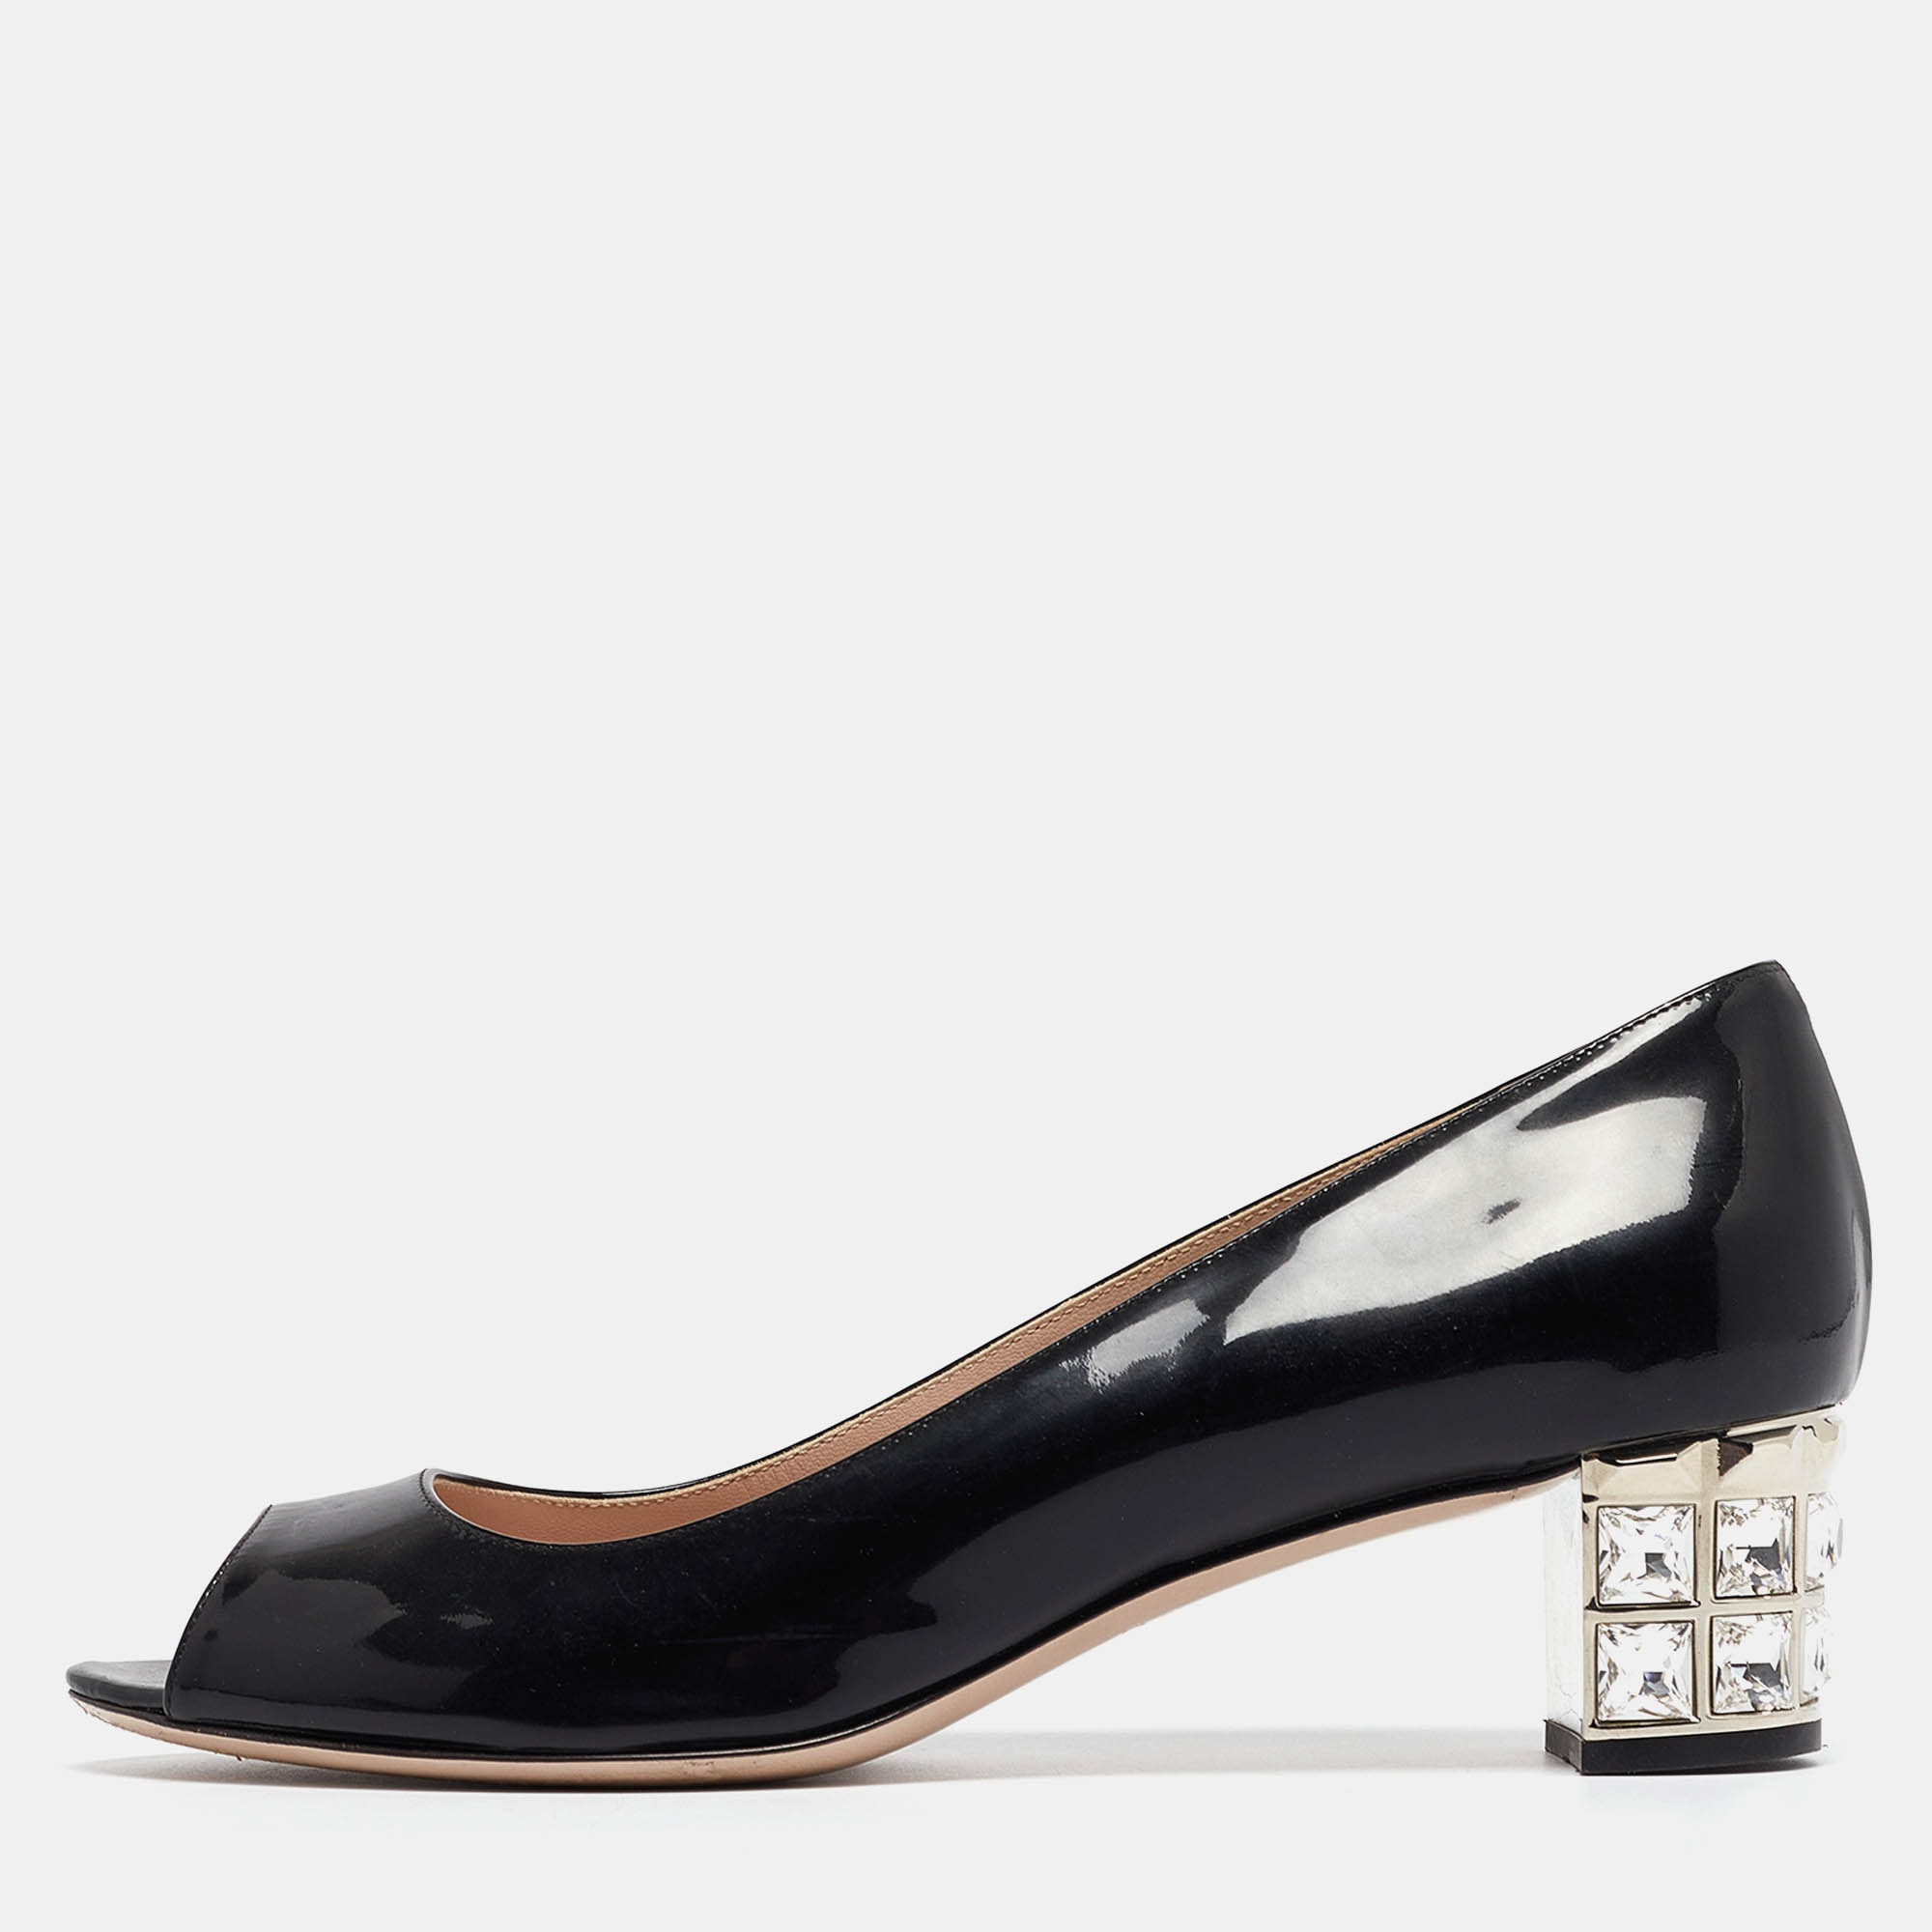 Miu Miu brings to you these lovely pumps to complement your fashionable ensembles. These black pumps are crafted from patent leather and feature crystal embellished block heels. They flaunt peep toes and come endowed with comfortable leather lined insoles.